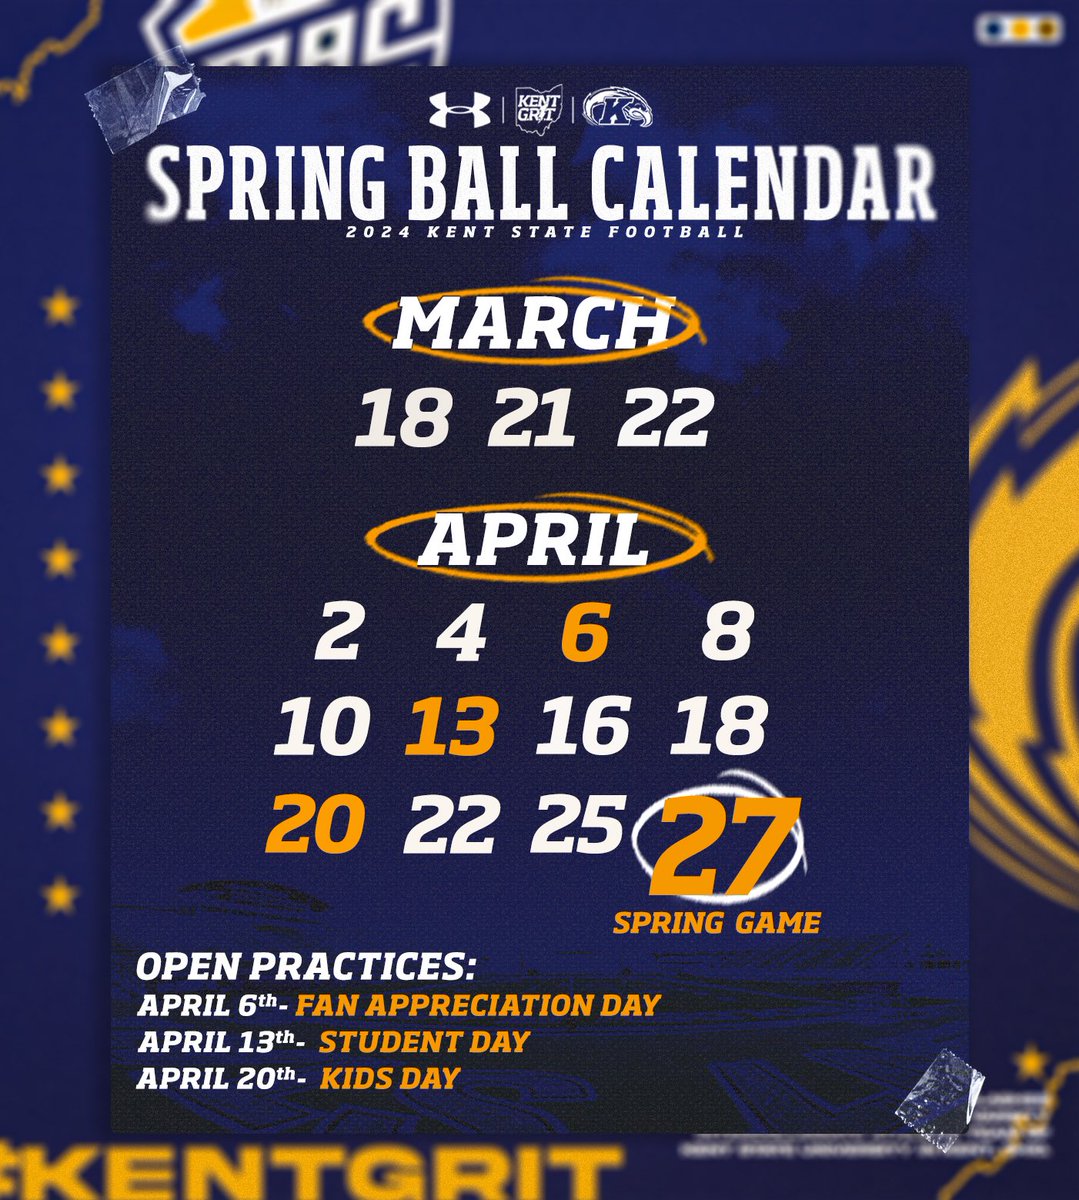 Spring Ball is right around the corner. Mark your calendars as we prepare to set the tone, grind, and respond. 🏈🙌 #KentGRIT⚡️| #ALLIN🙌